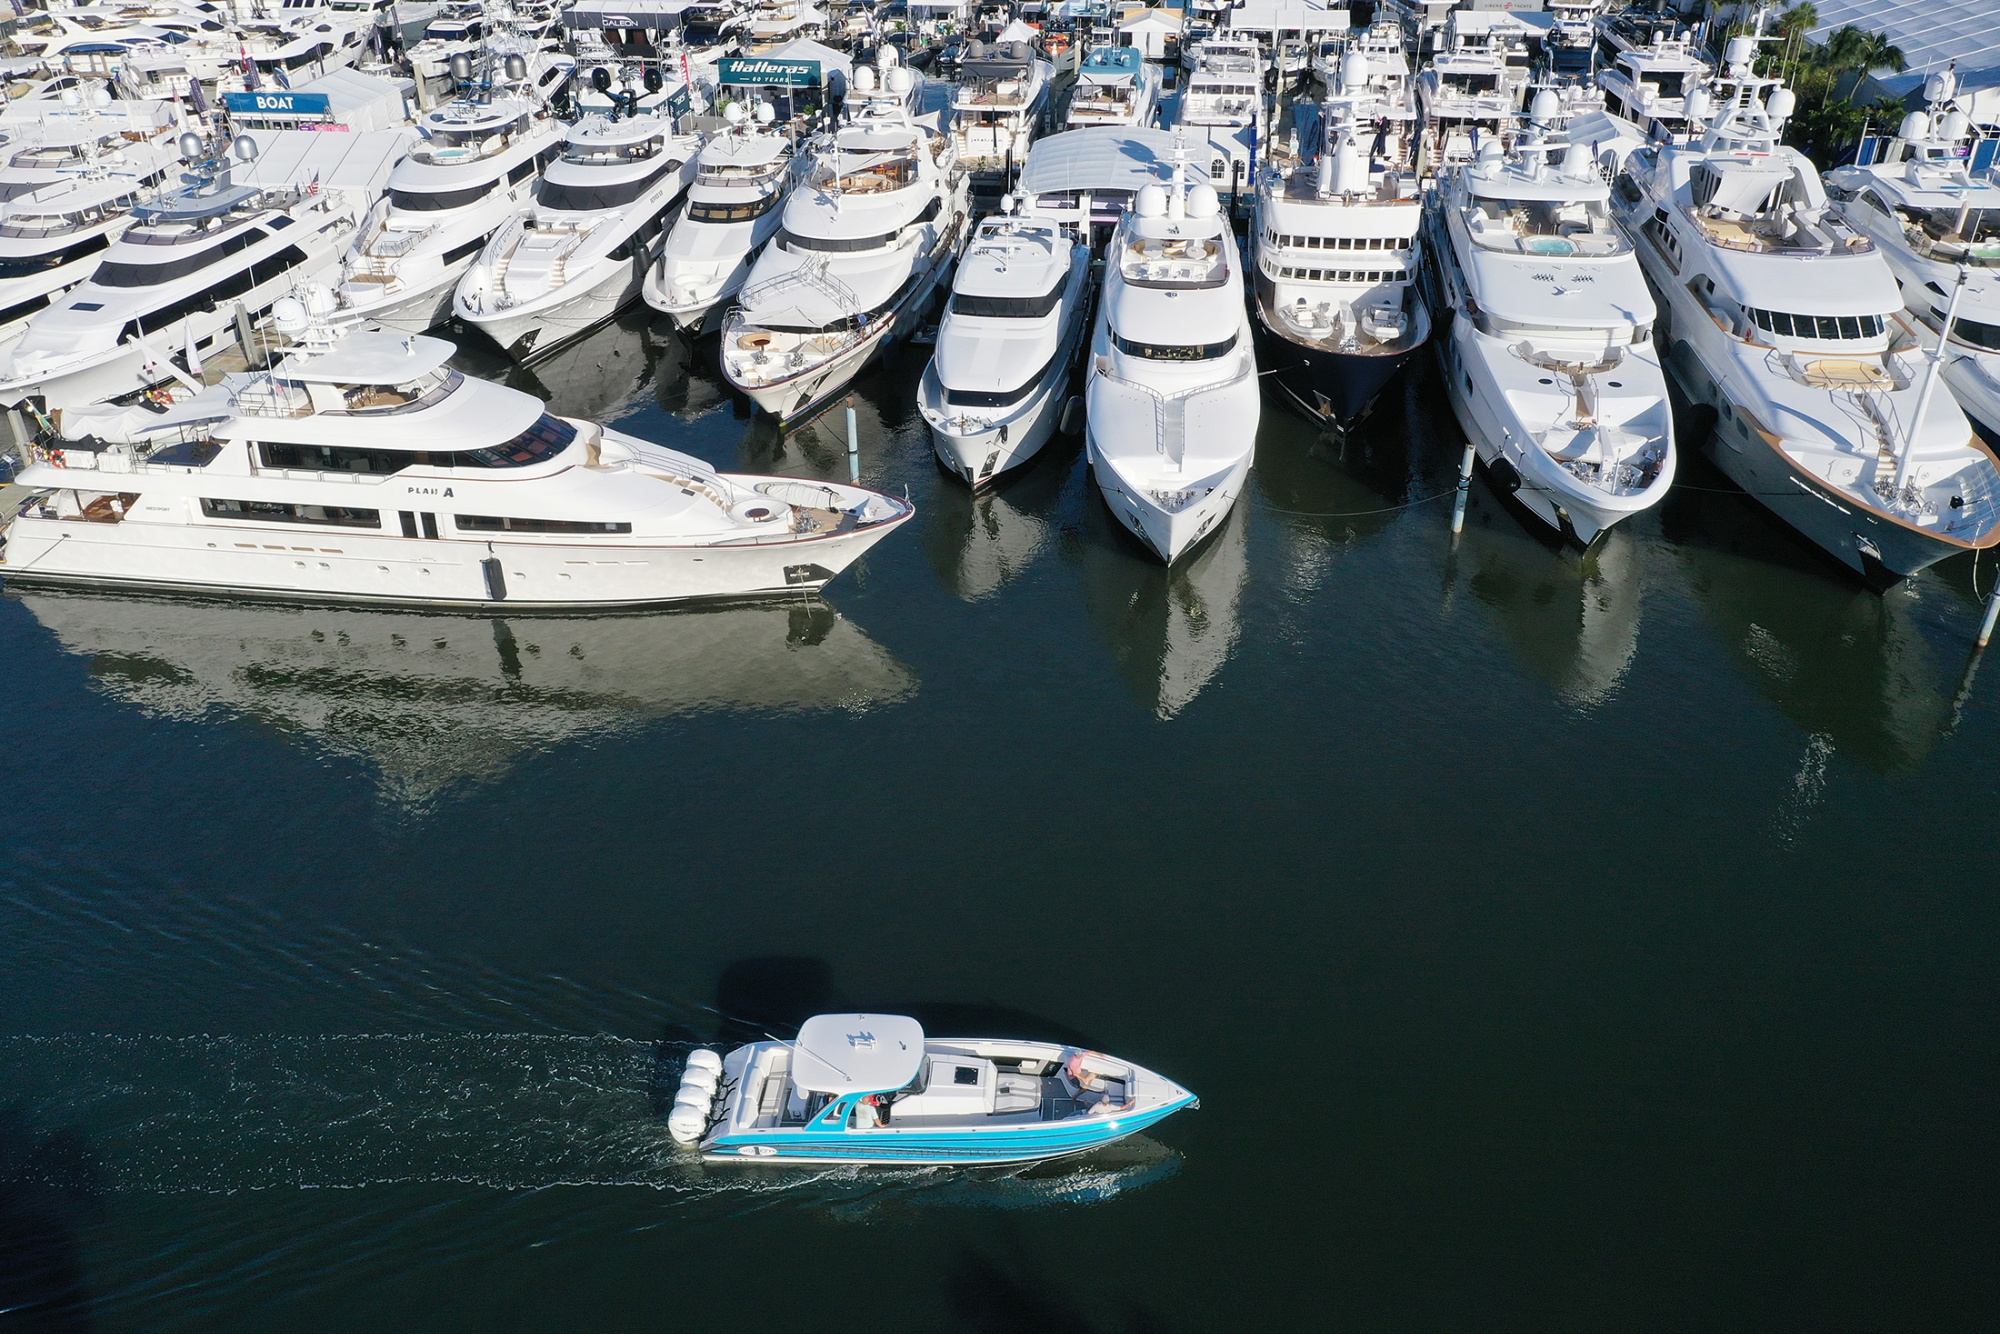 Super Rich Rethink Buying Yachts In Uncertain Economy